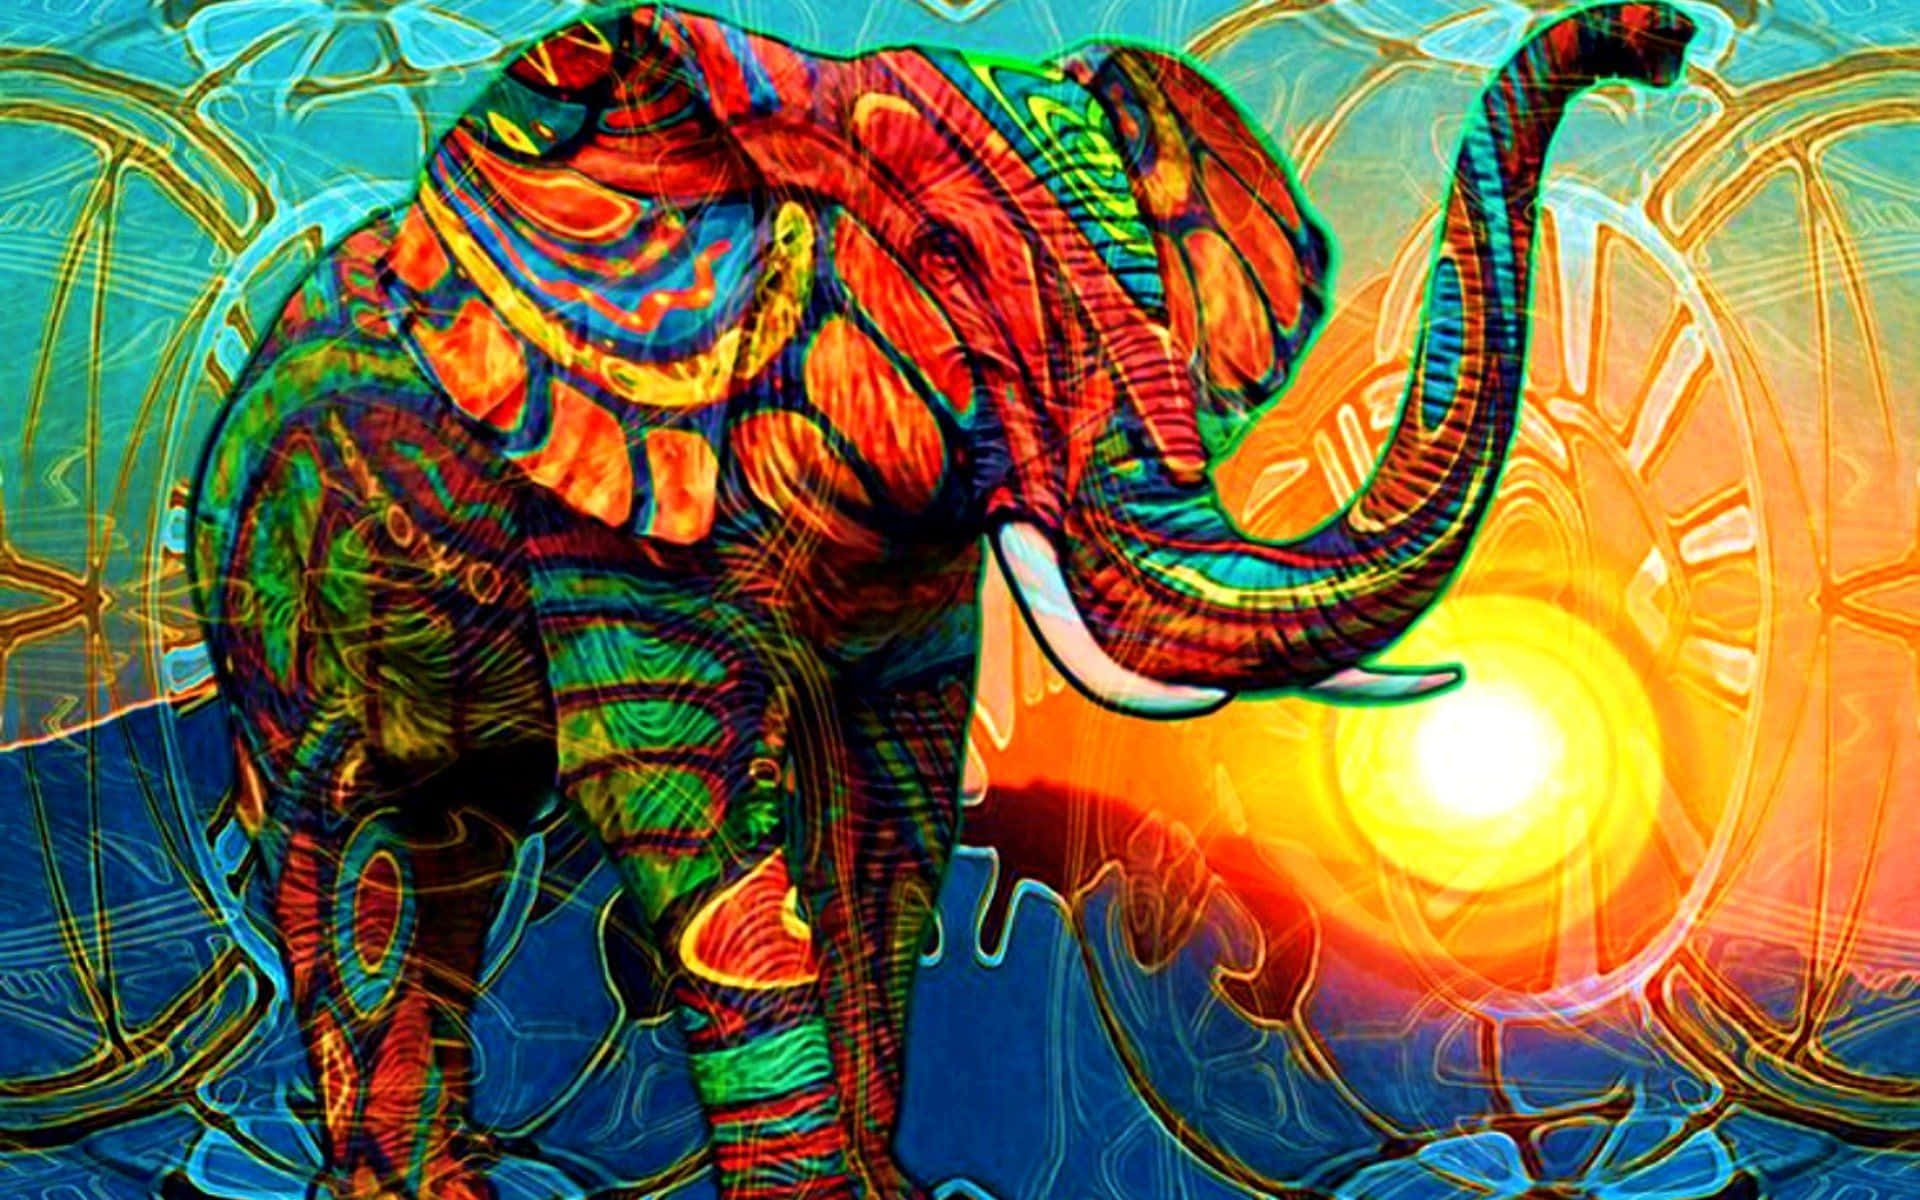 Psychedelic Wild Animals in a Surreal World Wallpaper